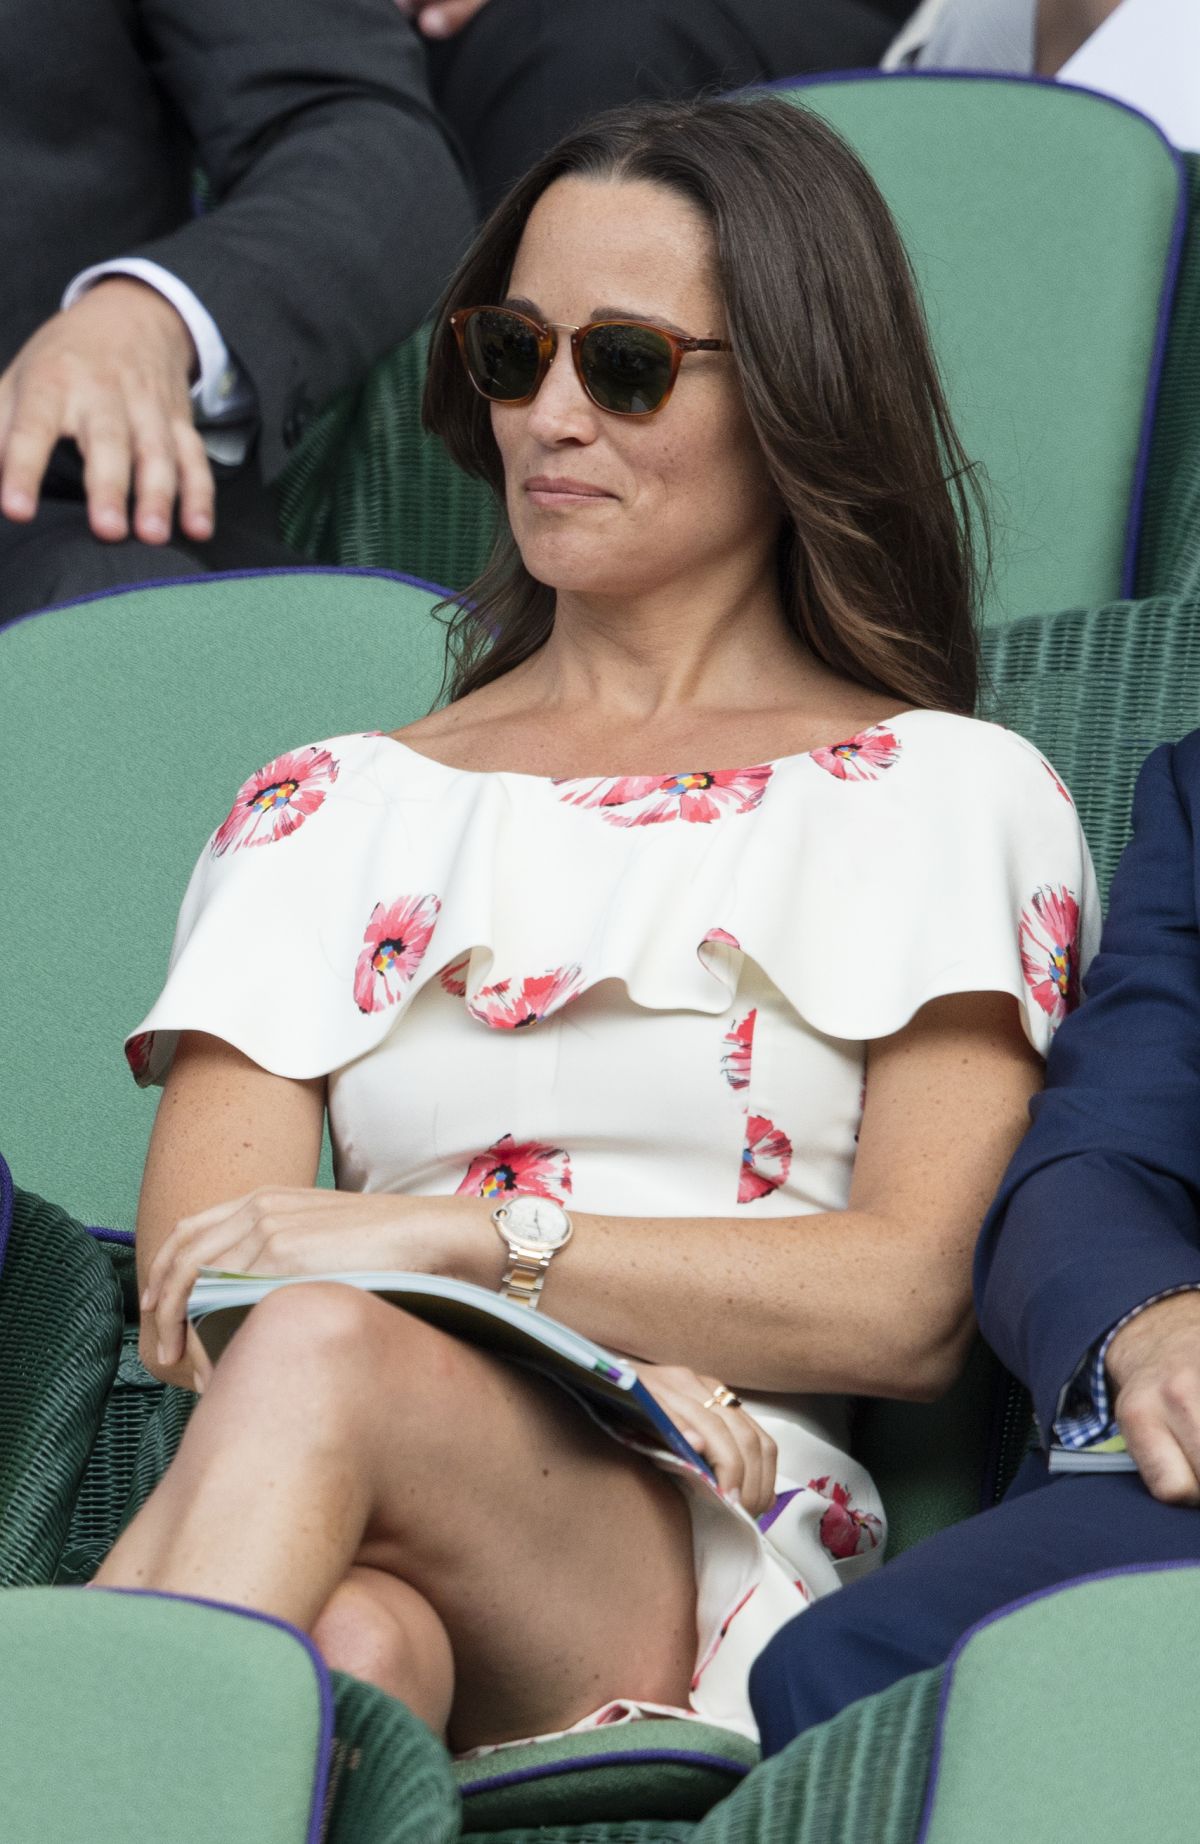 pippa-middleton-at-day-one-of-championships-in-wimbledon-06-27-2016_4 ...